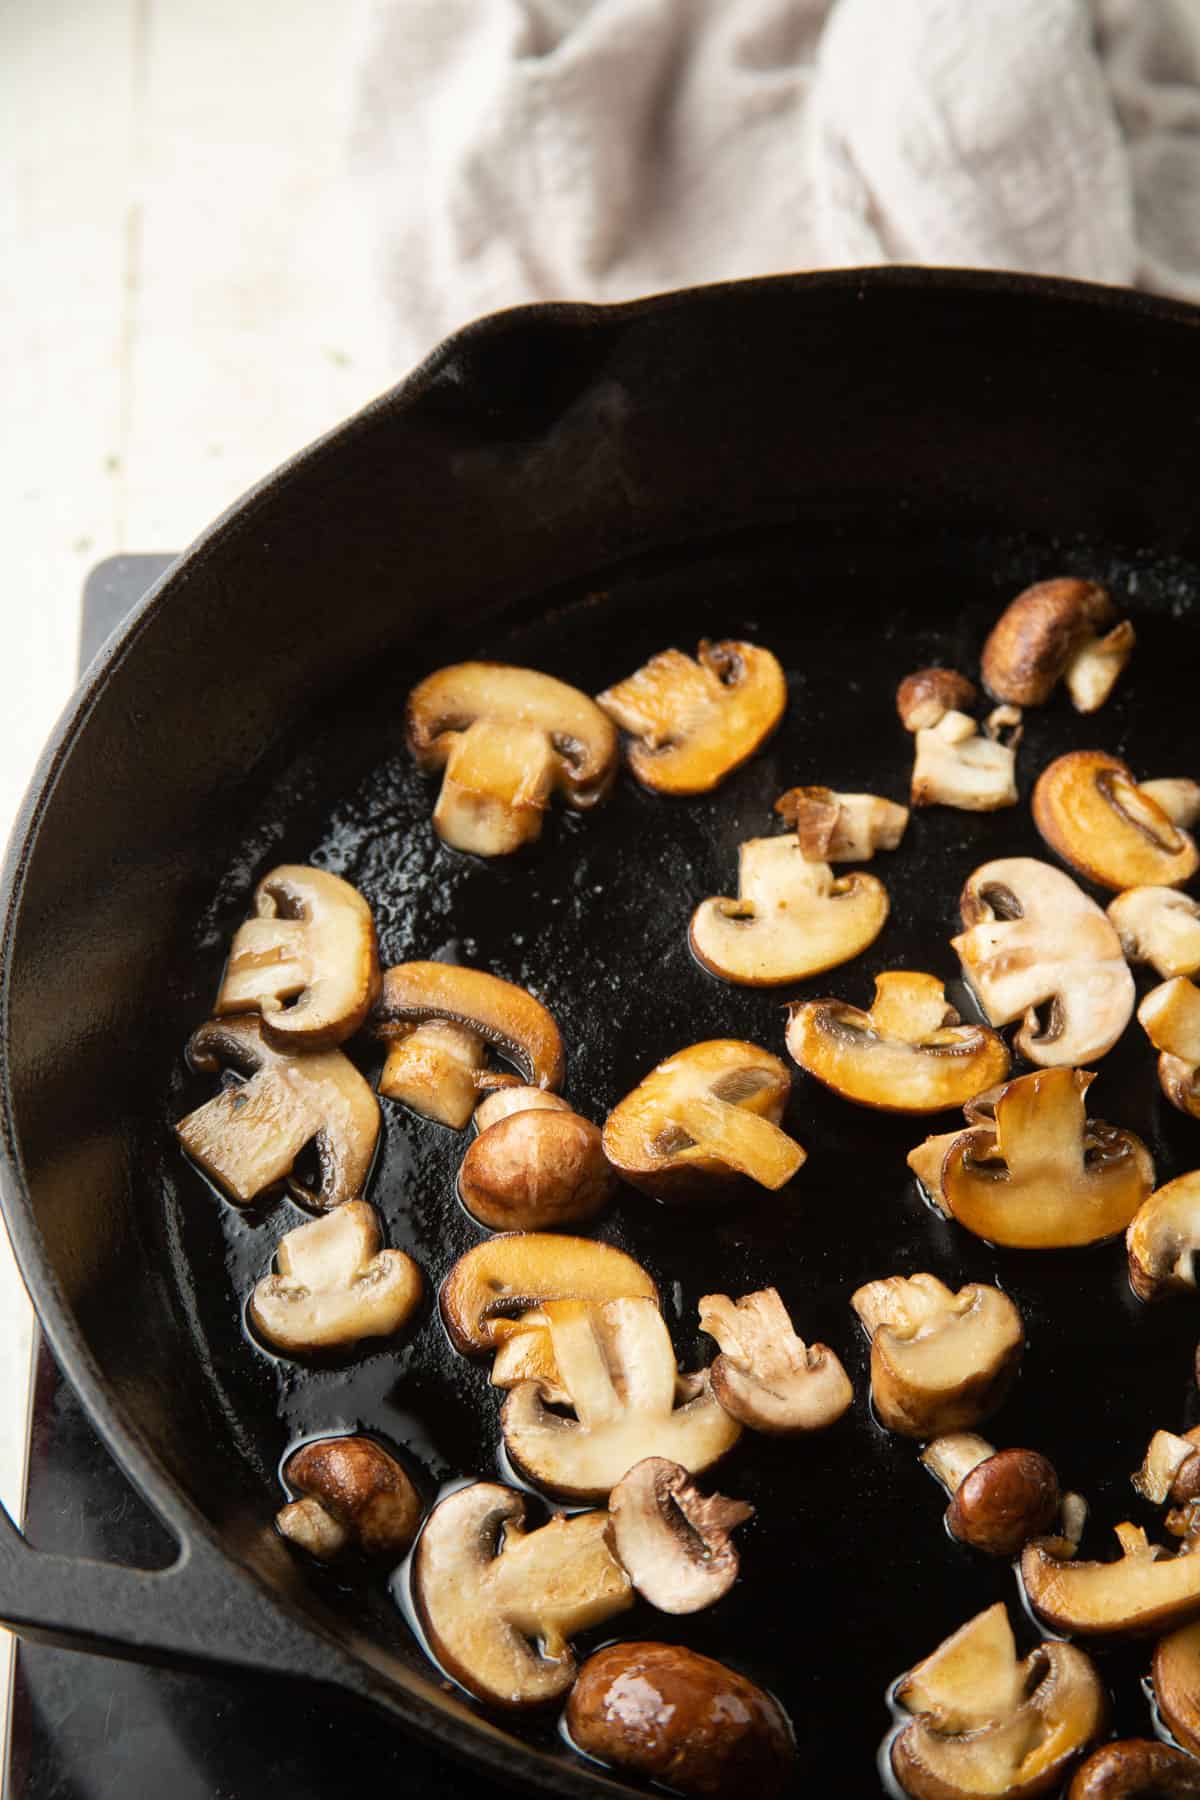 Cooking mushrooms in a skillet.